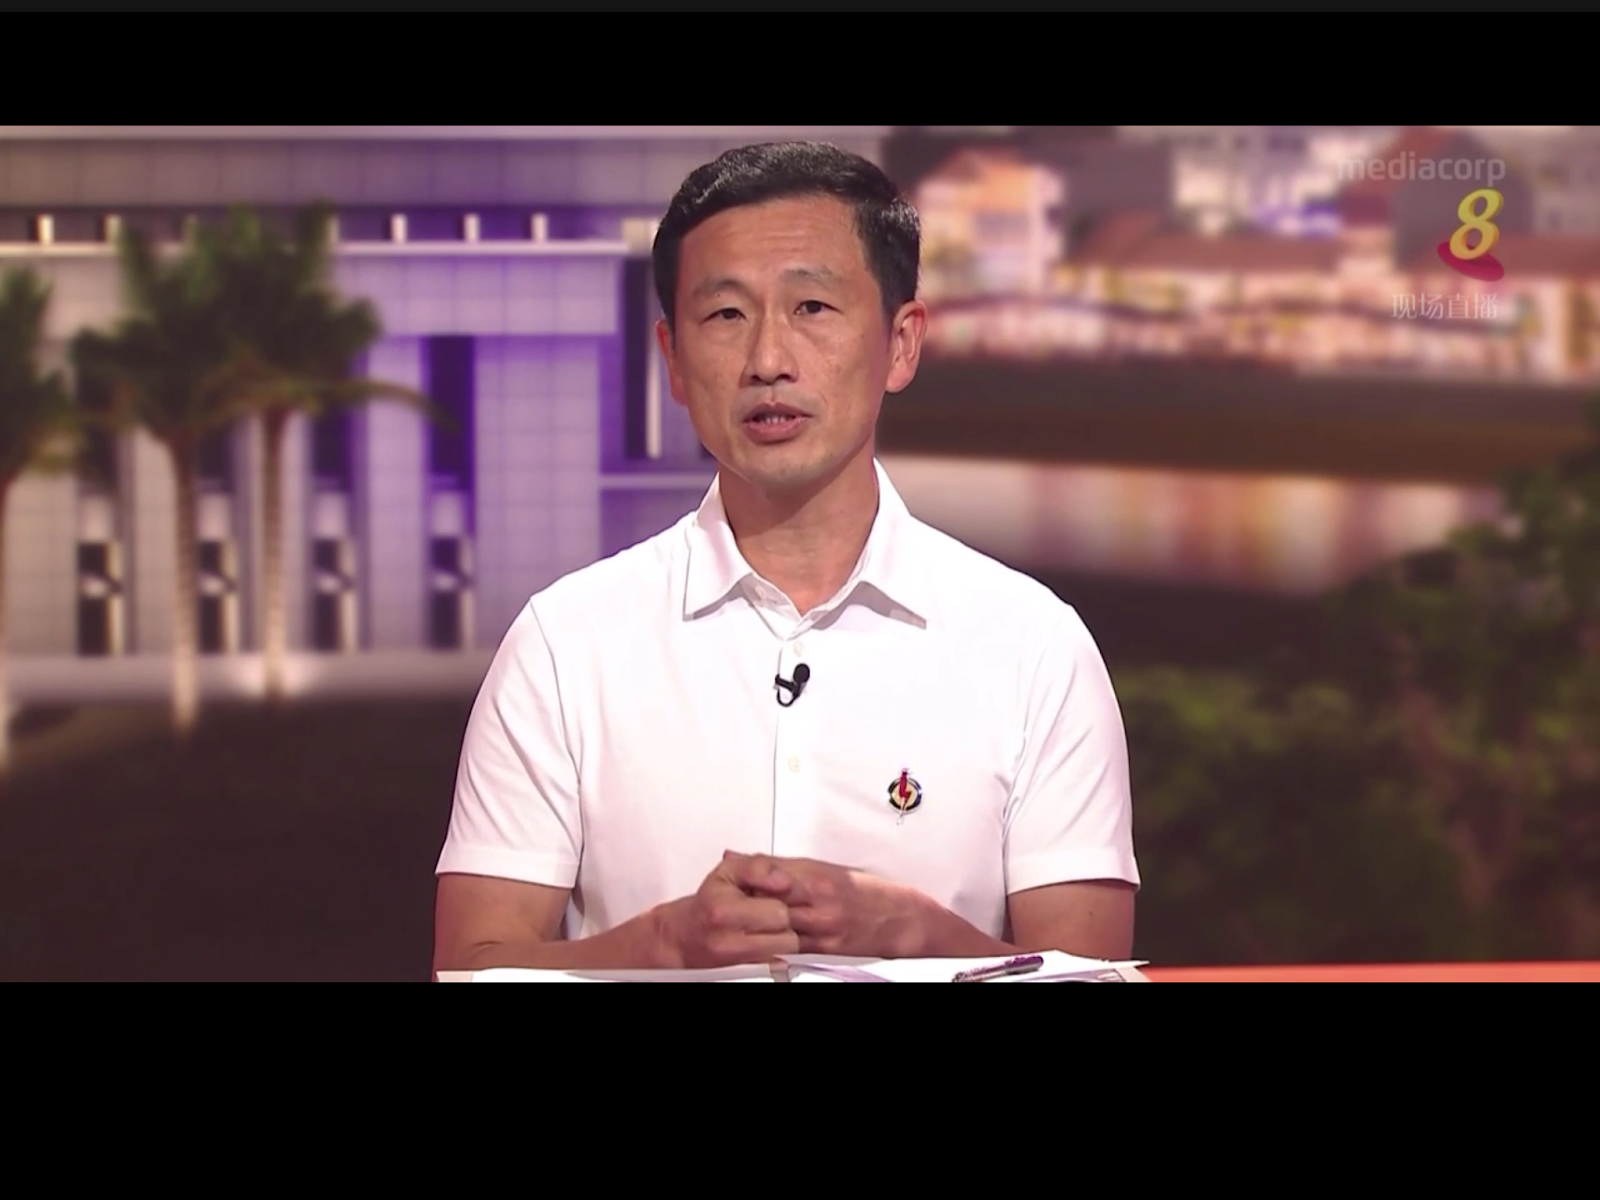 Mum S Calling 22 Chinese Idioms And Phrases Mr Ong Ye Kung Used During The Political Debate